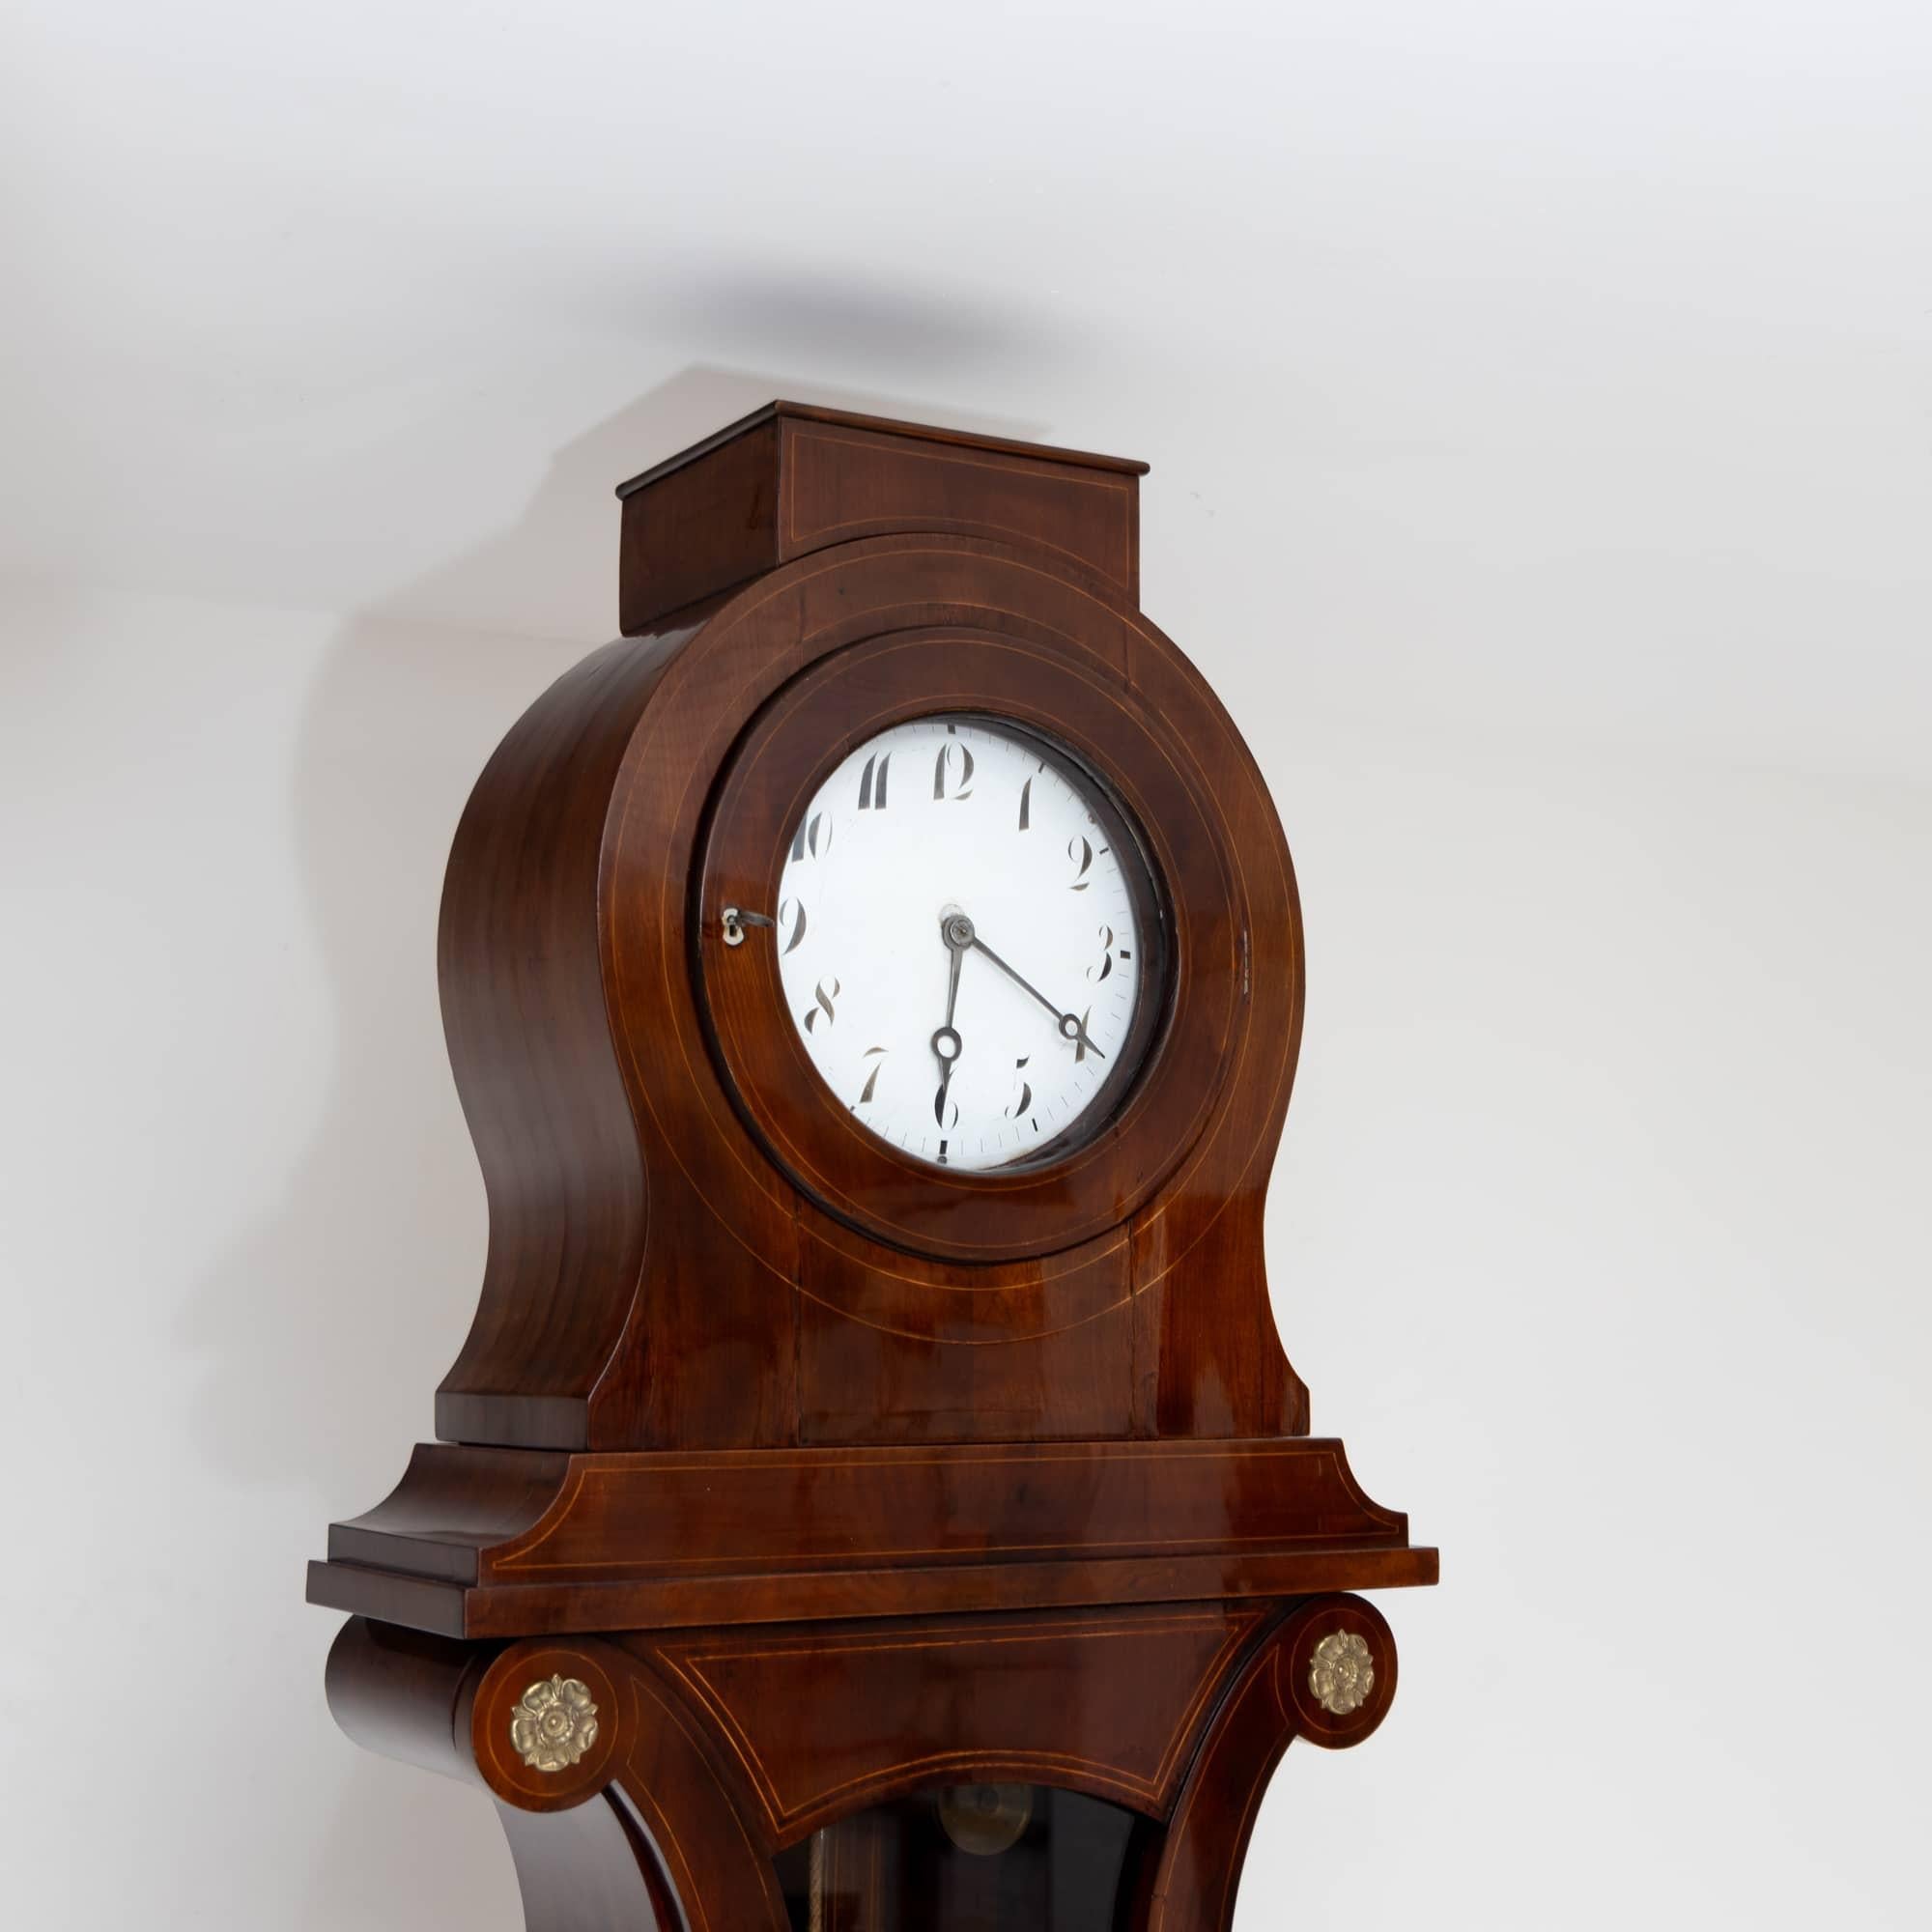 Polished Empire Mahogany Grandfather Clock, early 19th Century For Sale